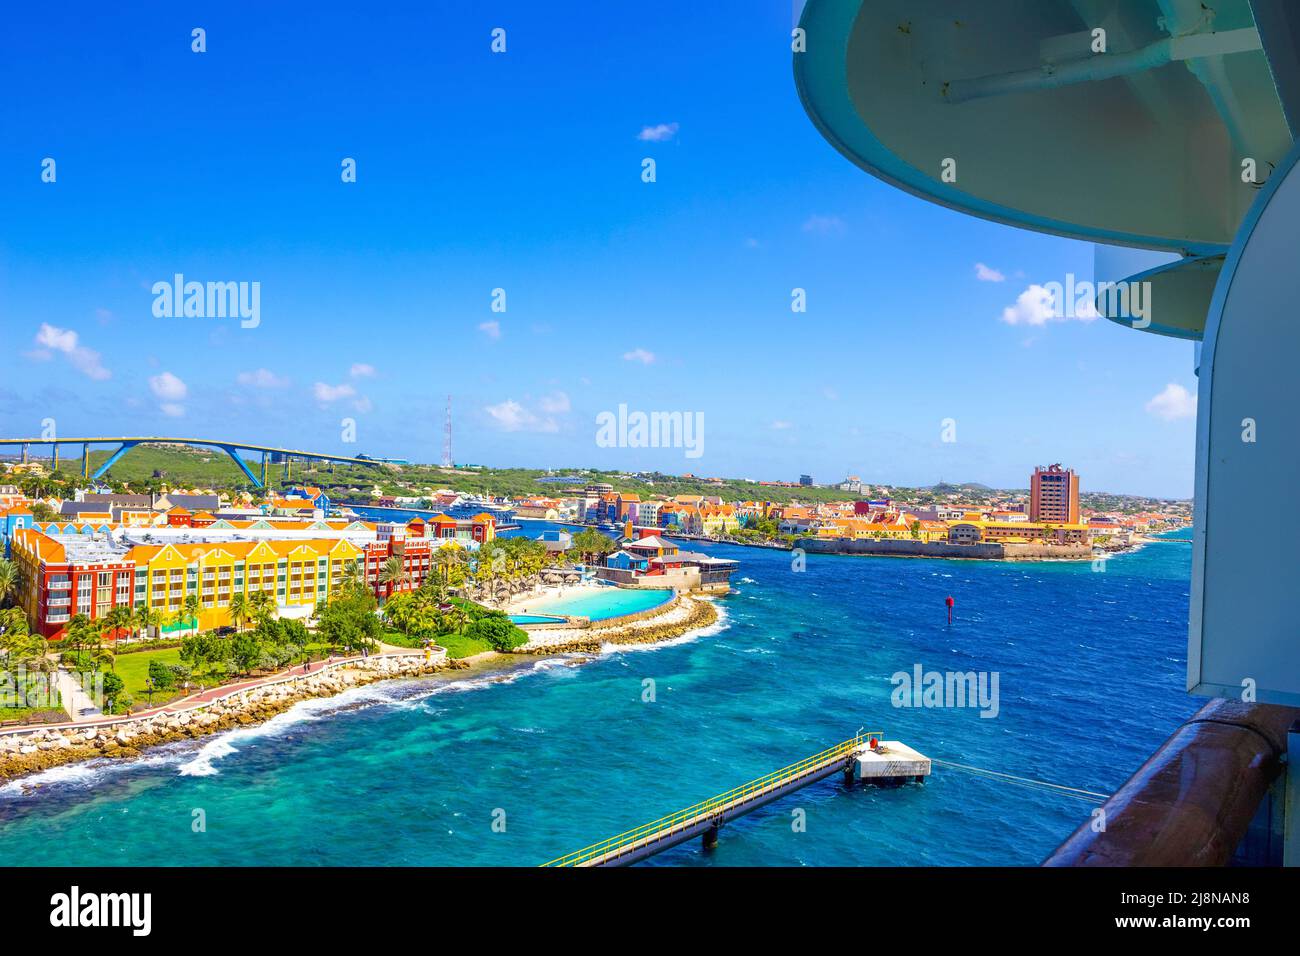 The Island Curacao is a tropical paradise in the Antilles in the Caribbean sea with beautiful architecture, beaches. Stock Photo